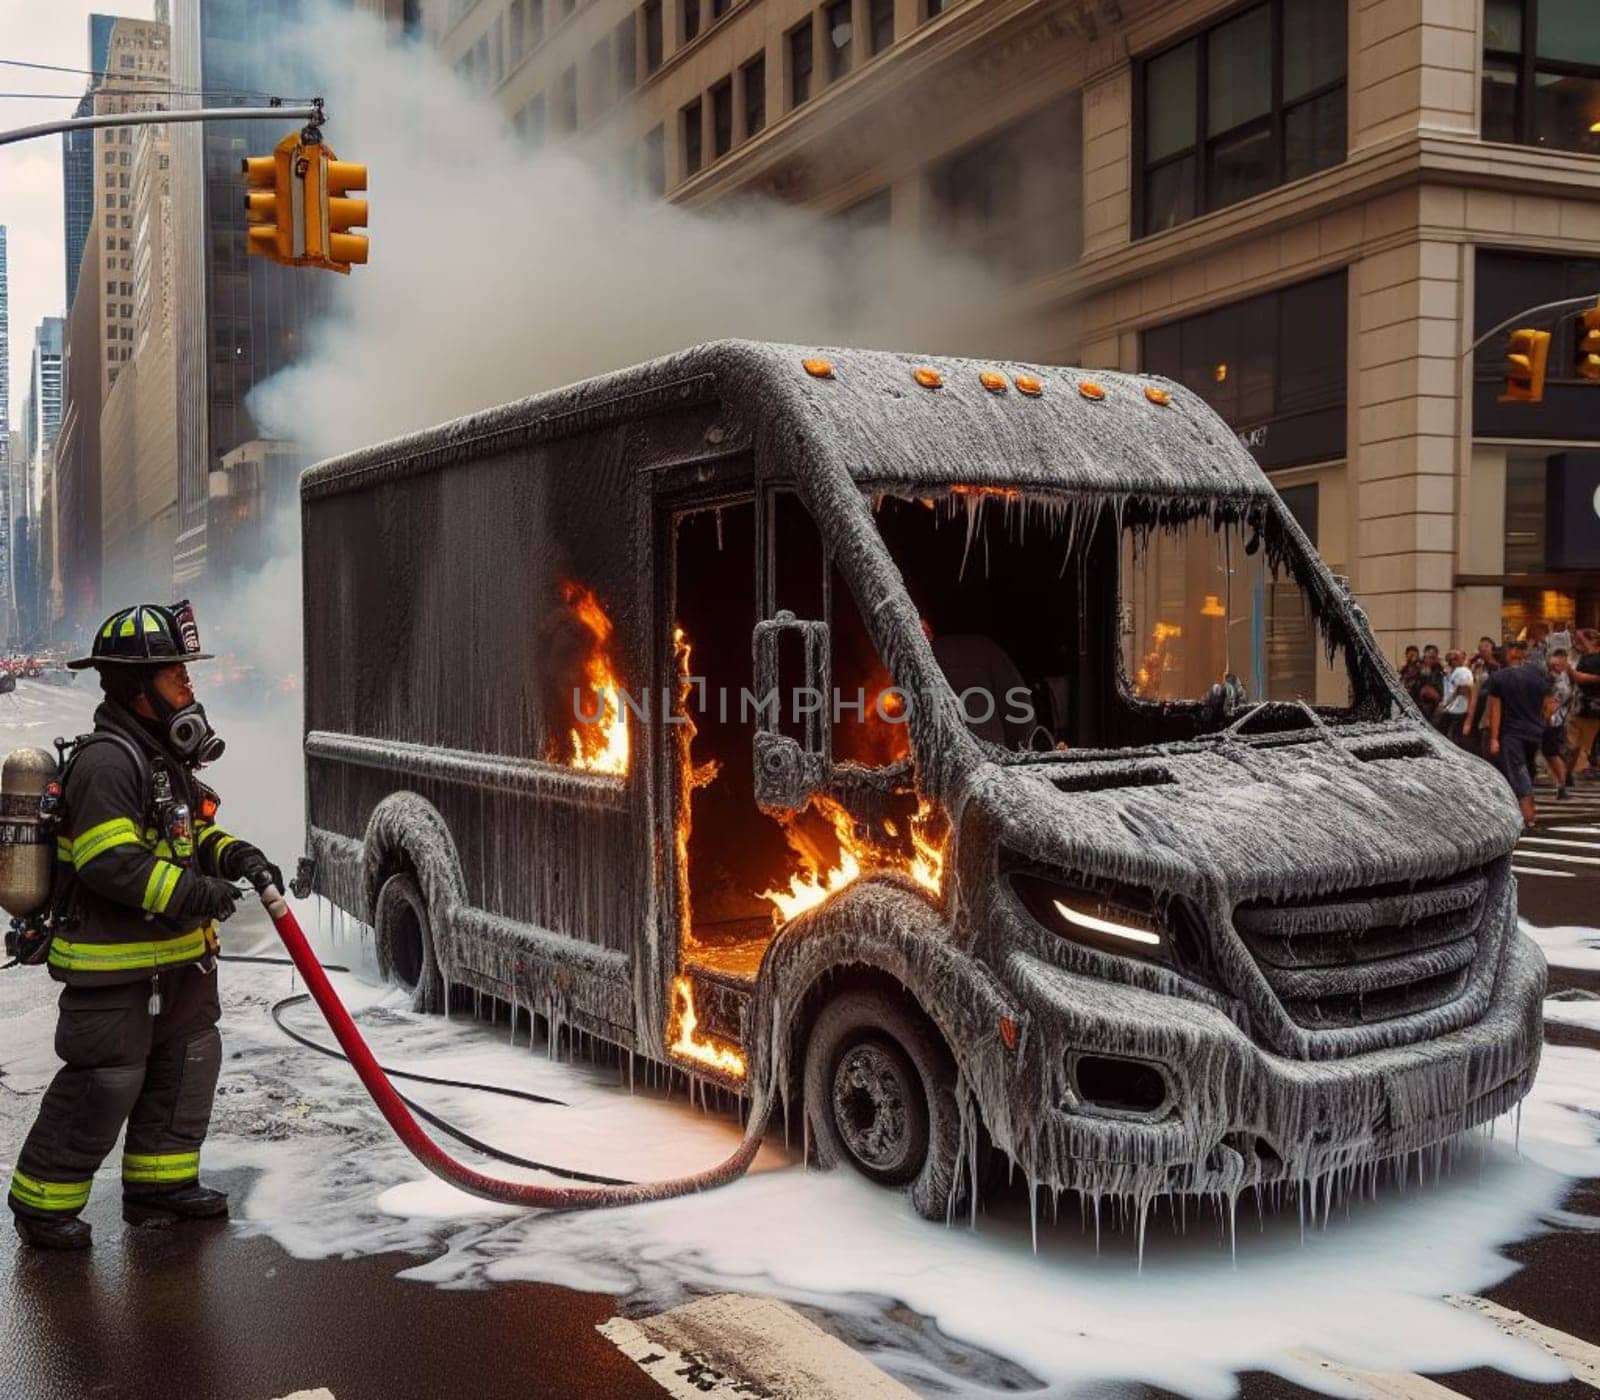 electric hybrid cargo courier truck van burn bottom chasis, firefighter apply foam to extinguish flames big smoke ai generated